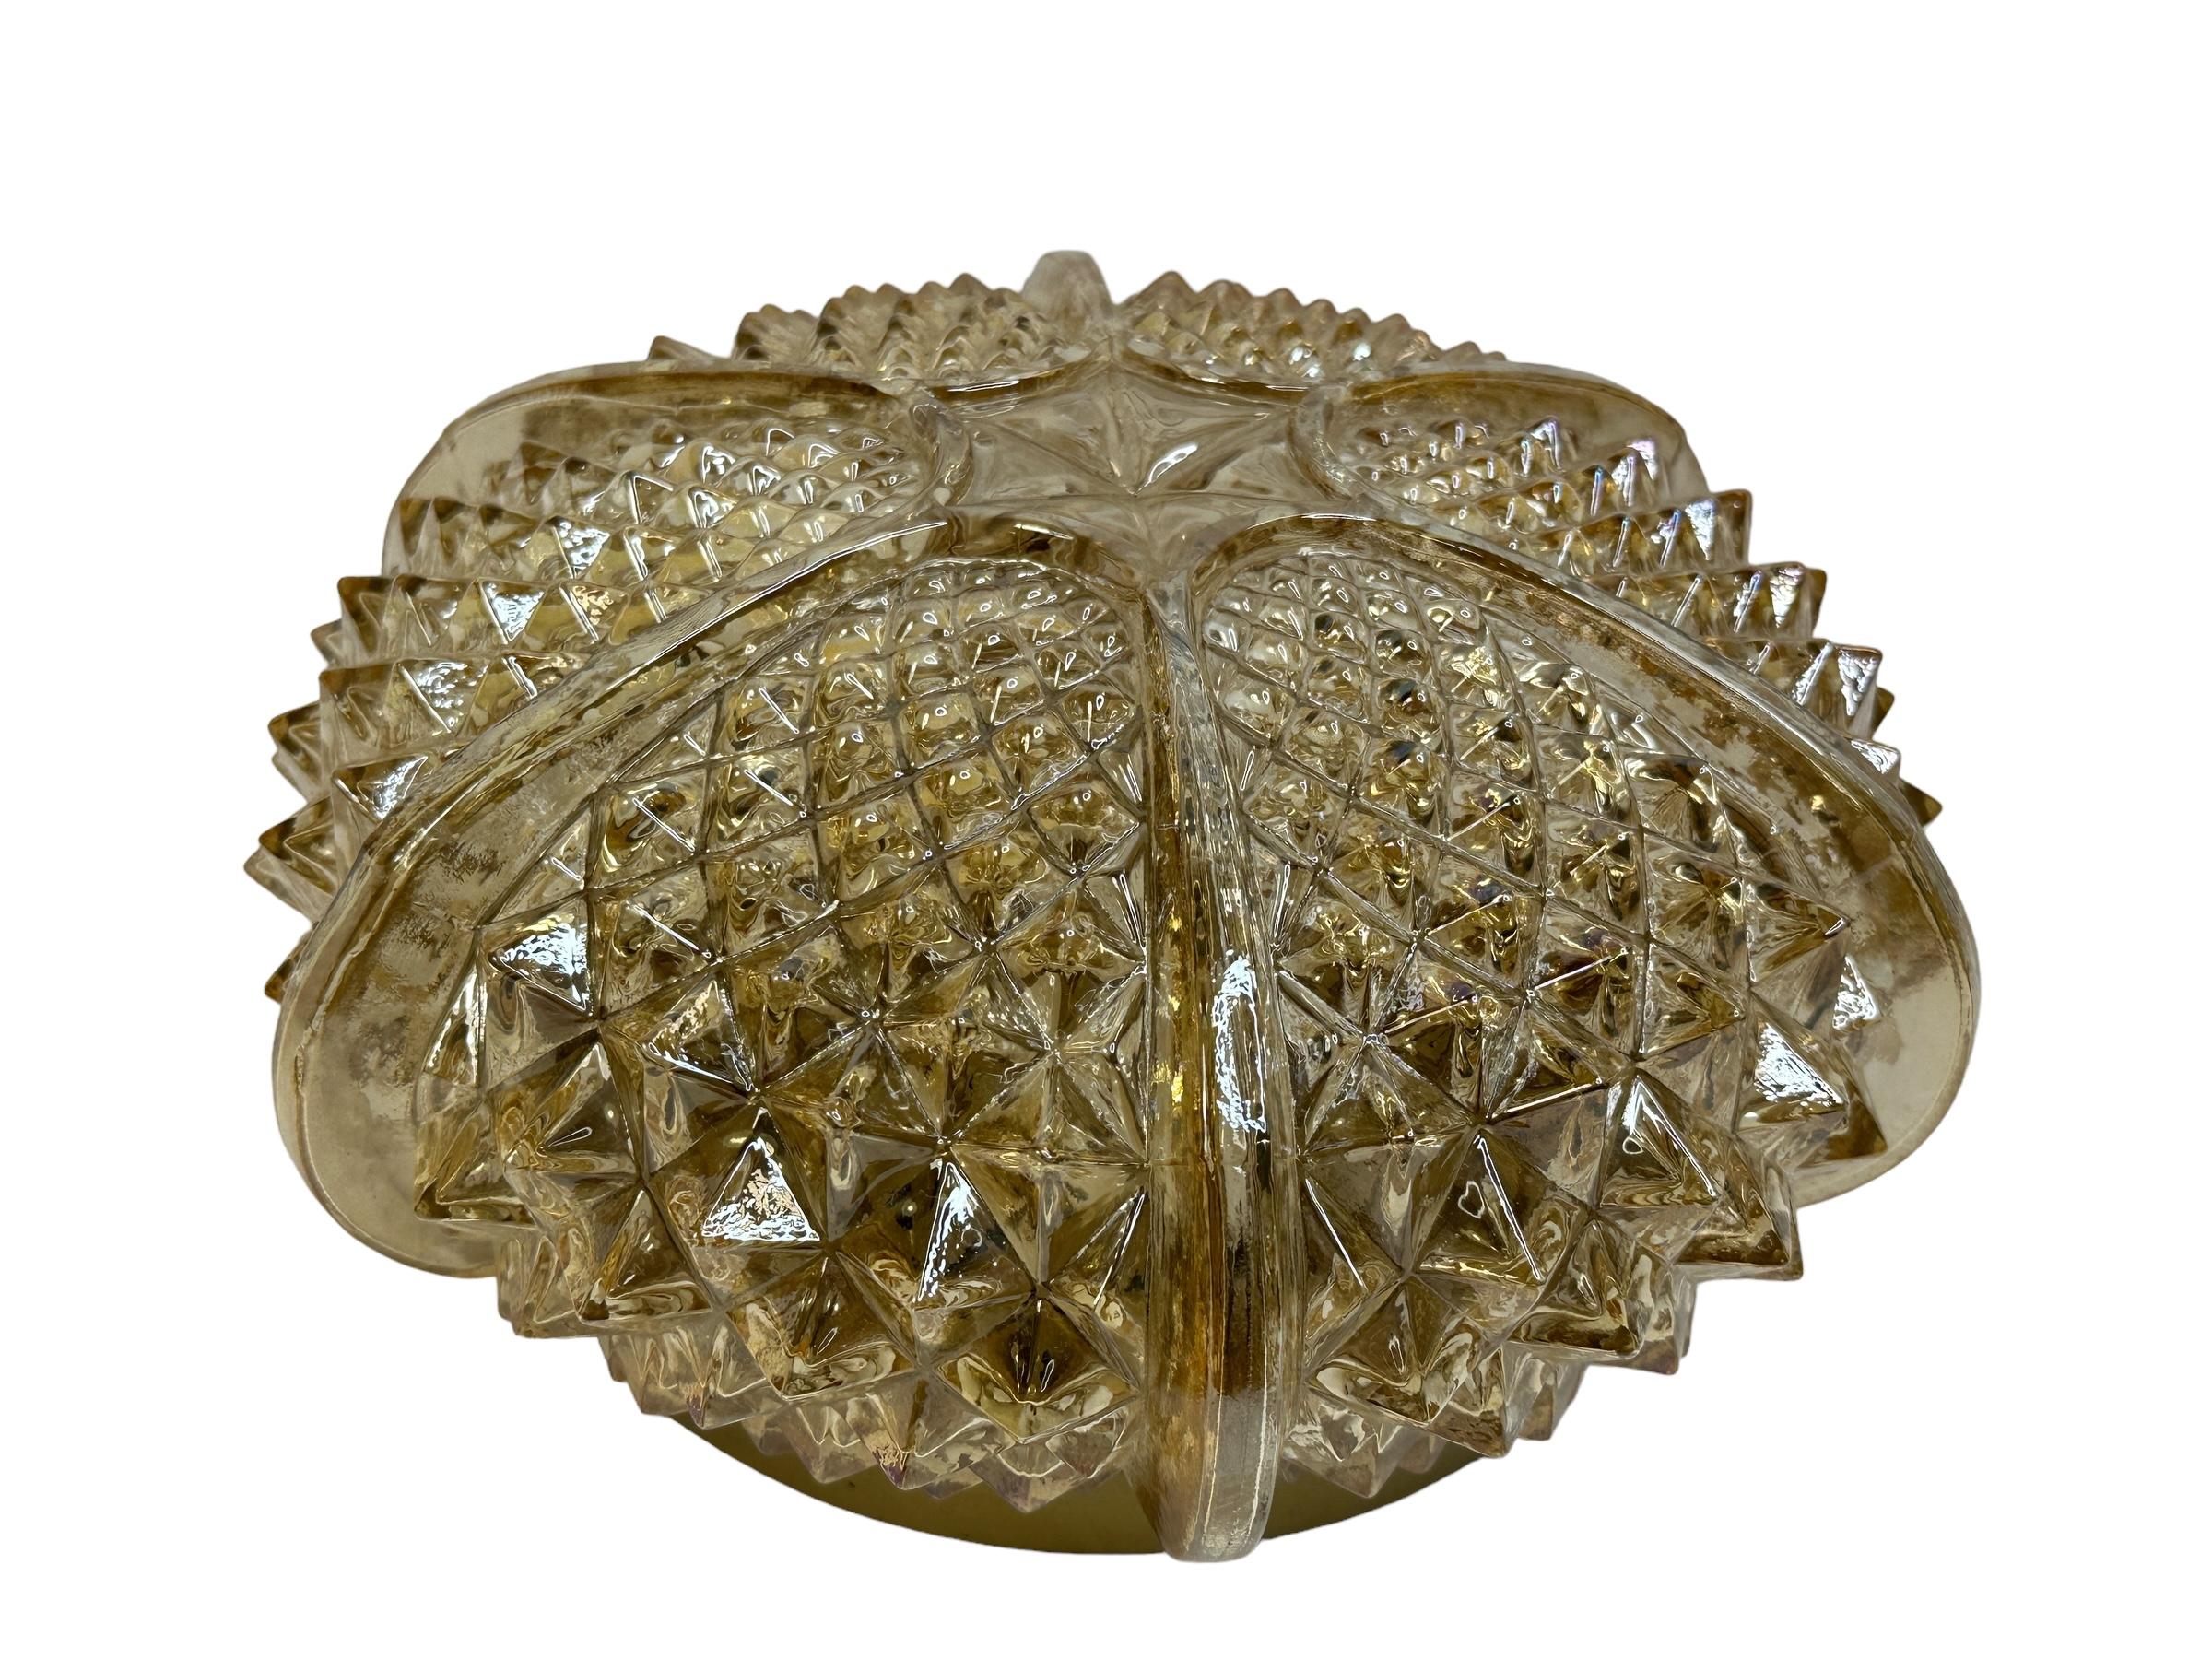 A beautiful German glass flush mount with metal fixture. The fixture requires one European E27 / 110 Volt Edison bulbs, up to 60 watt. It has a smoked or amber colored glass. A nice addition to any room. Found at an Estate Sale in Nuremberg, Germany.